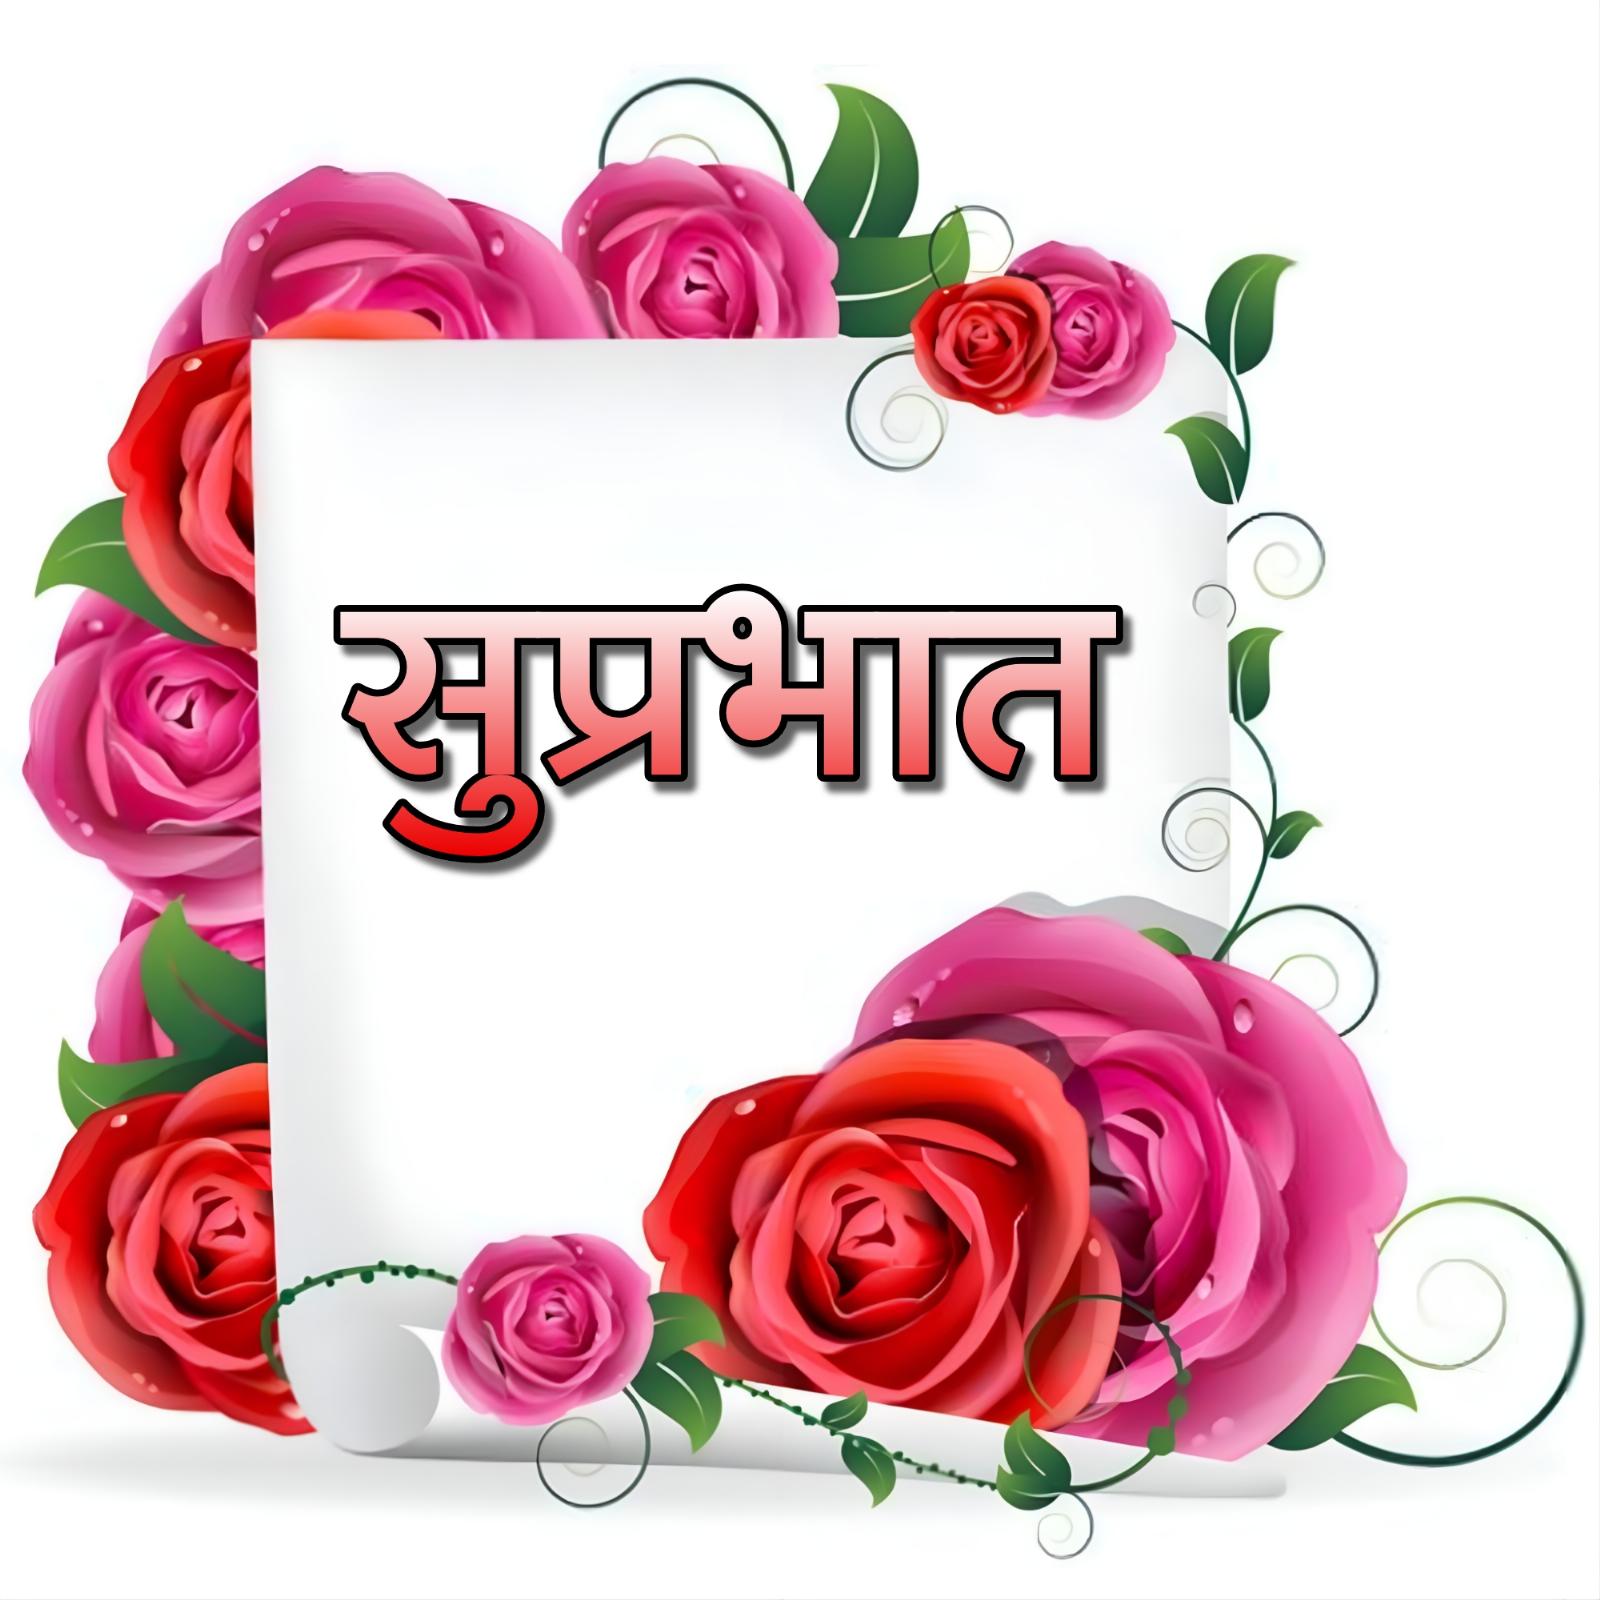 Suprabhat Images With Red Rose Flower